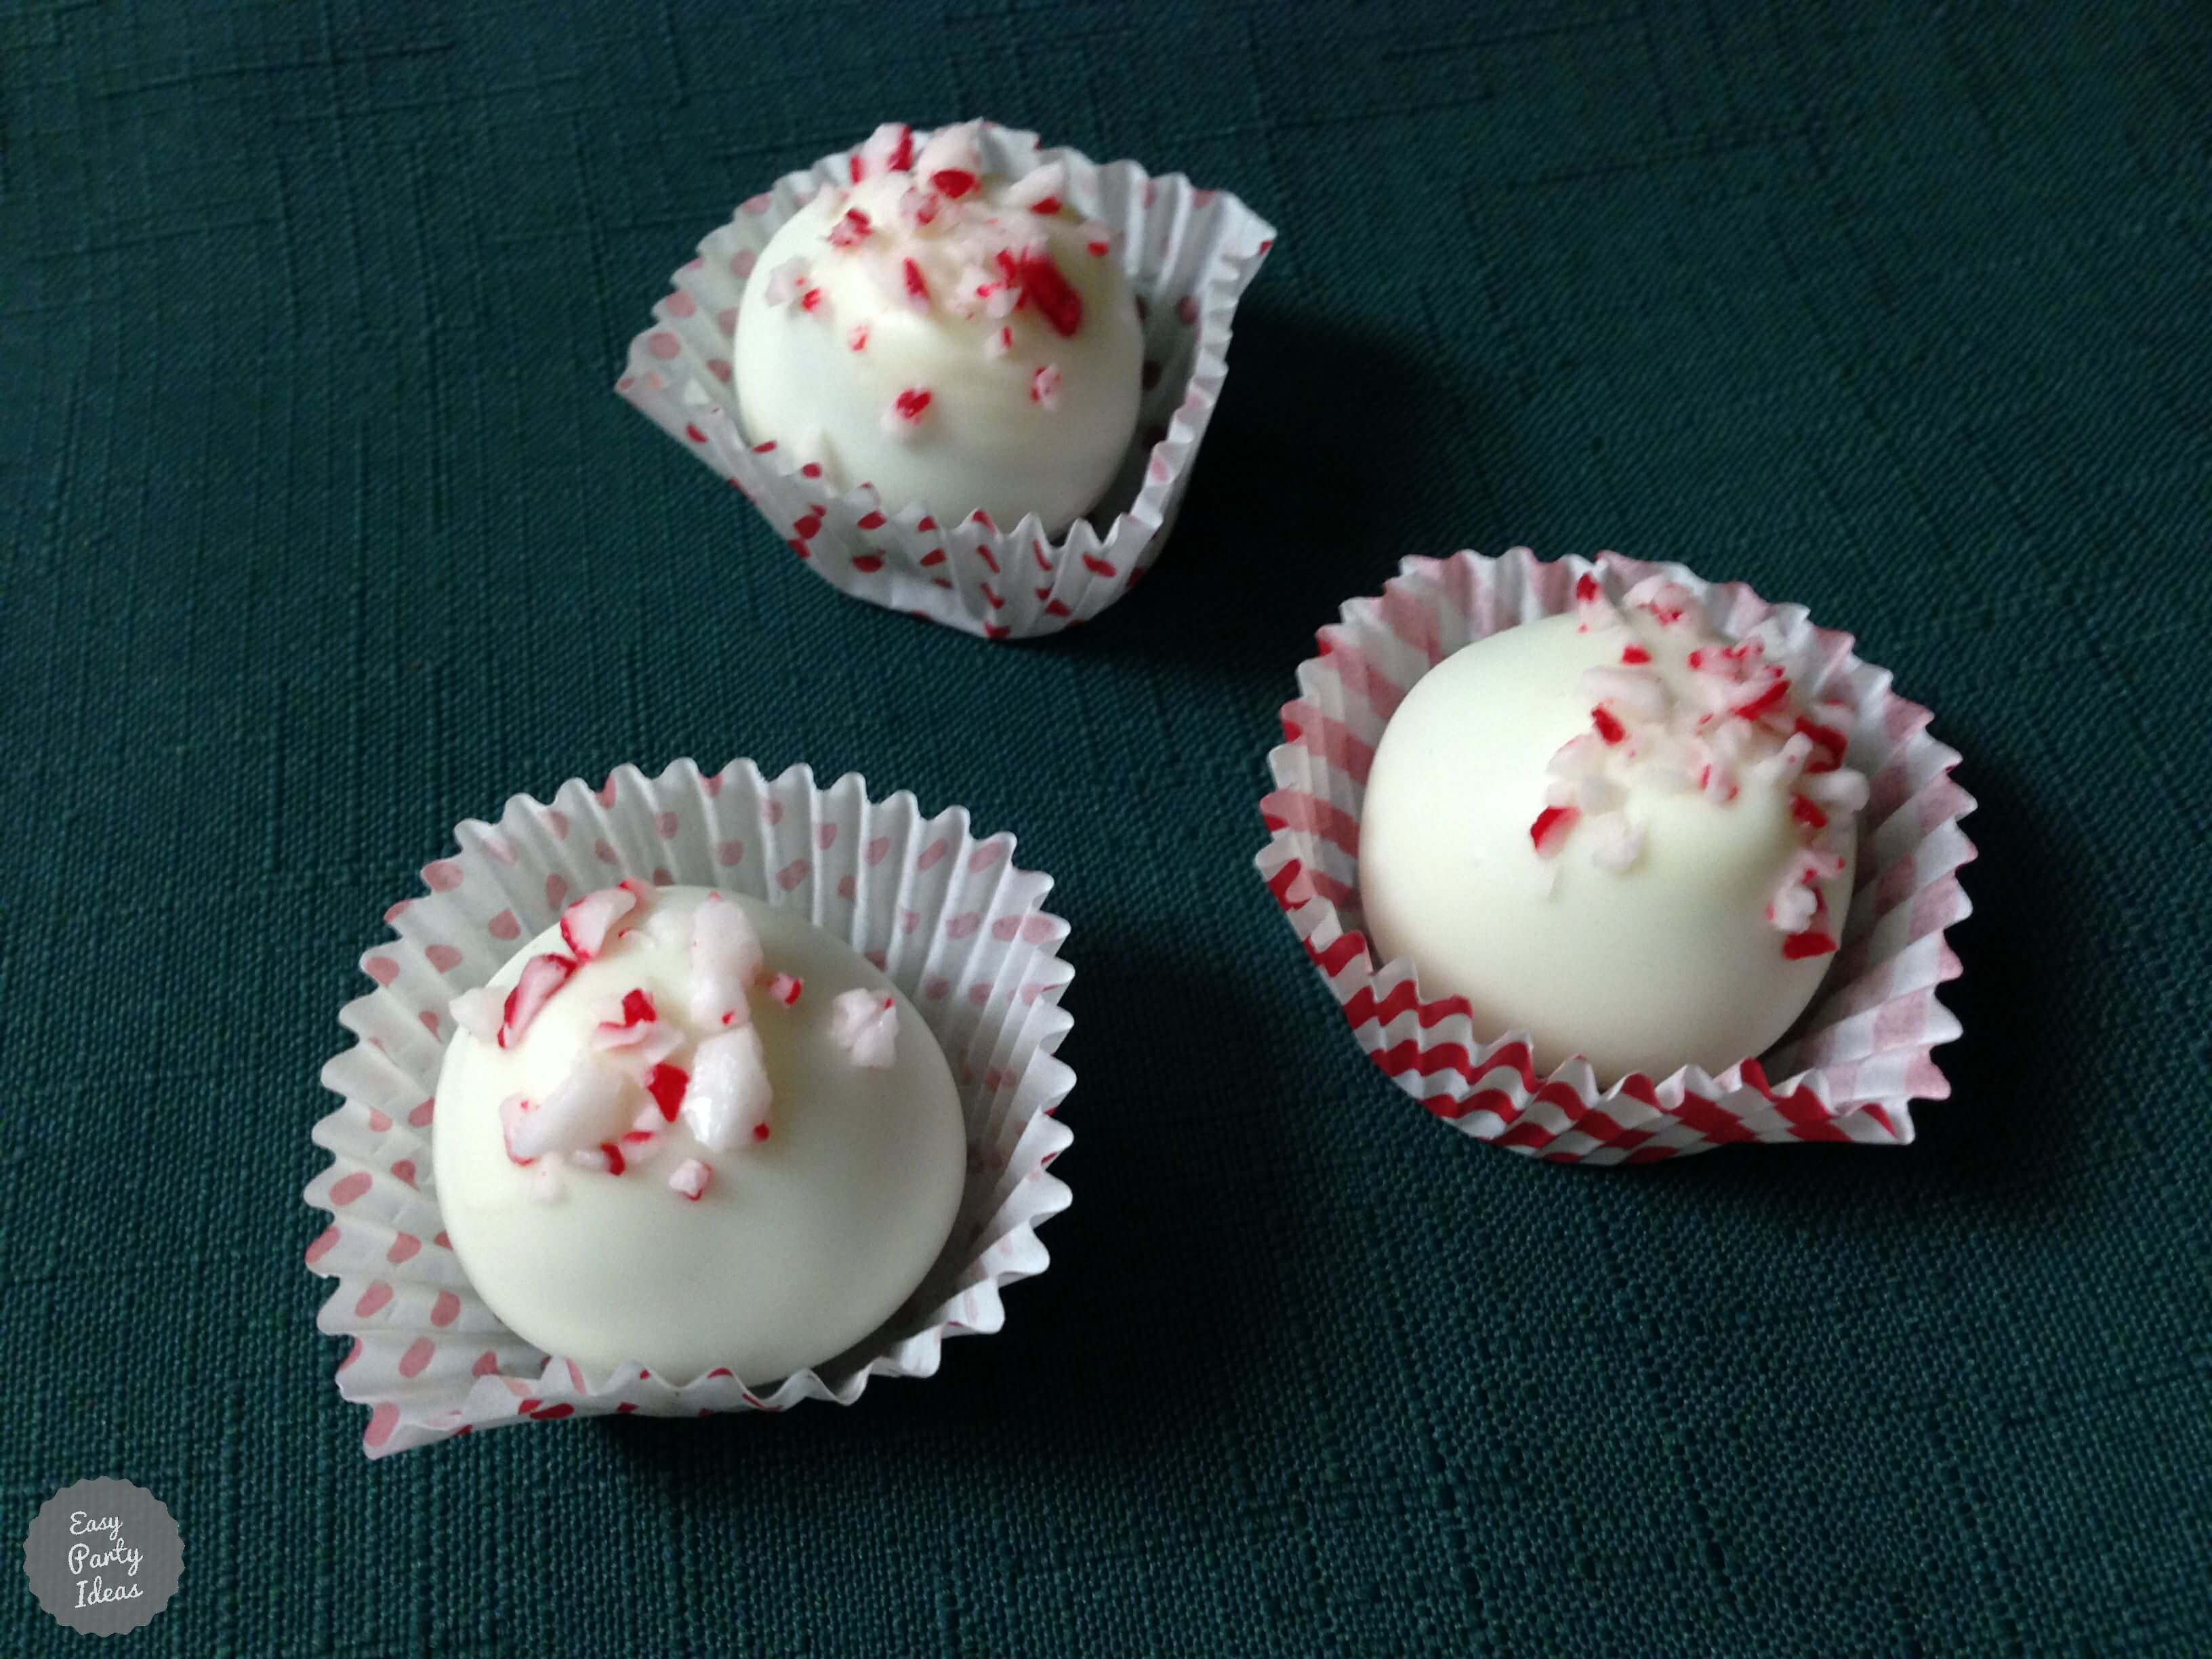 Cake balls with crushed peppermint